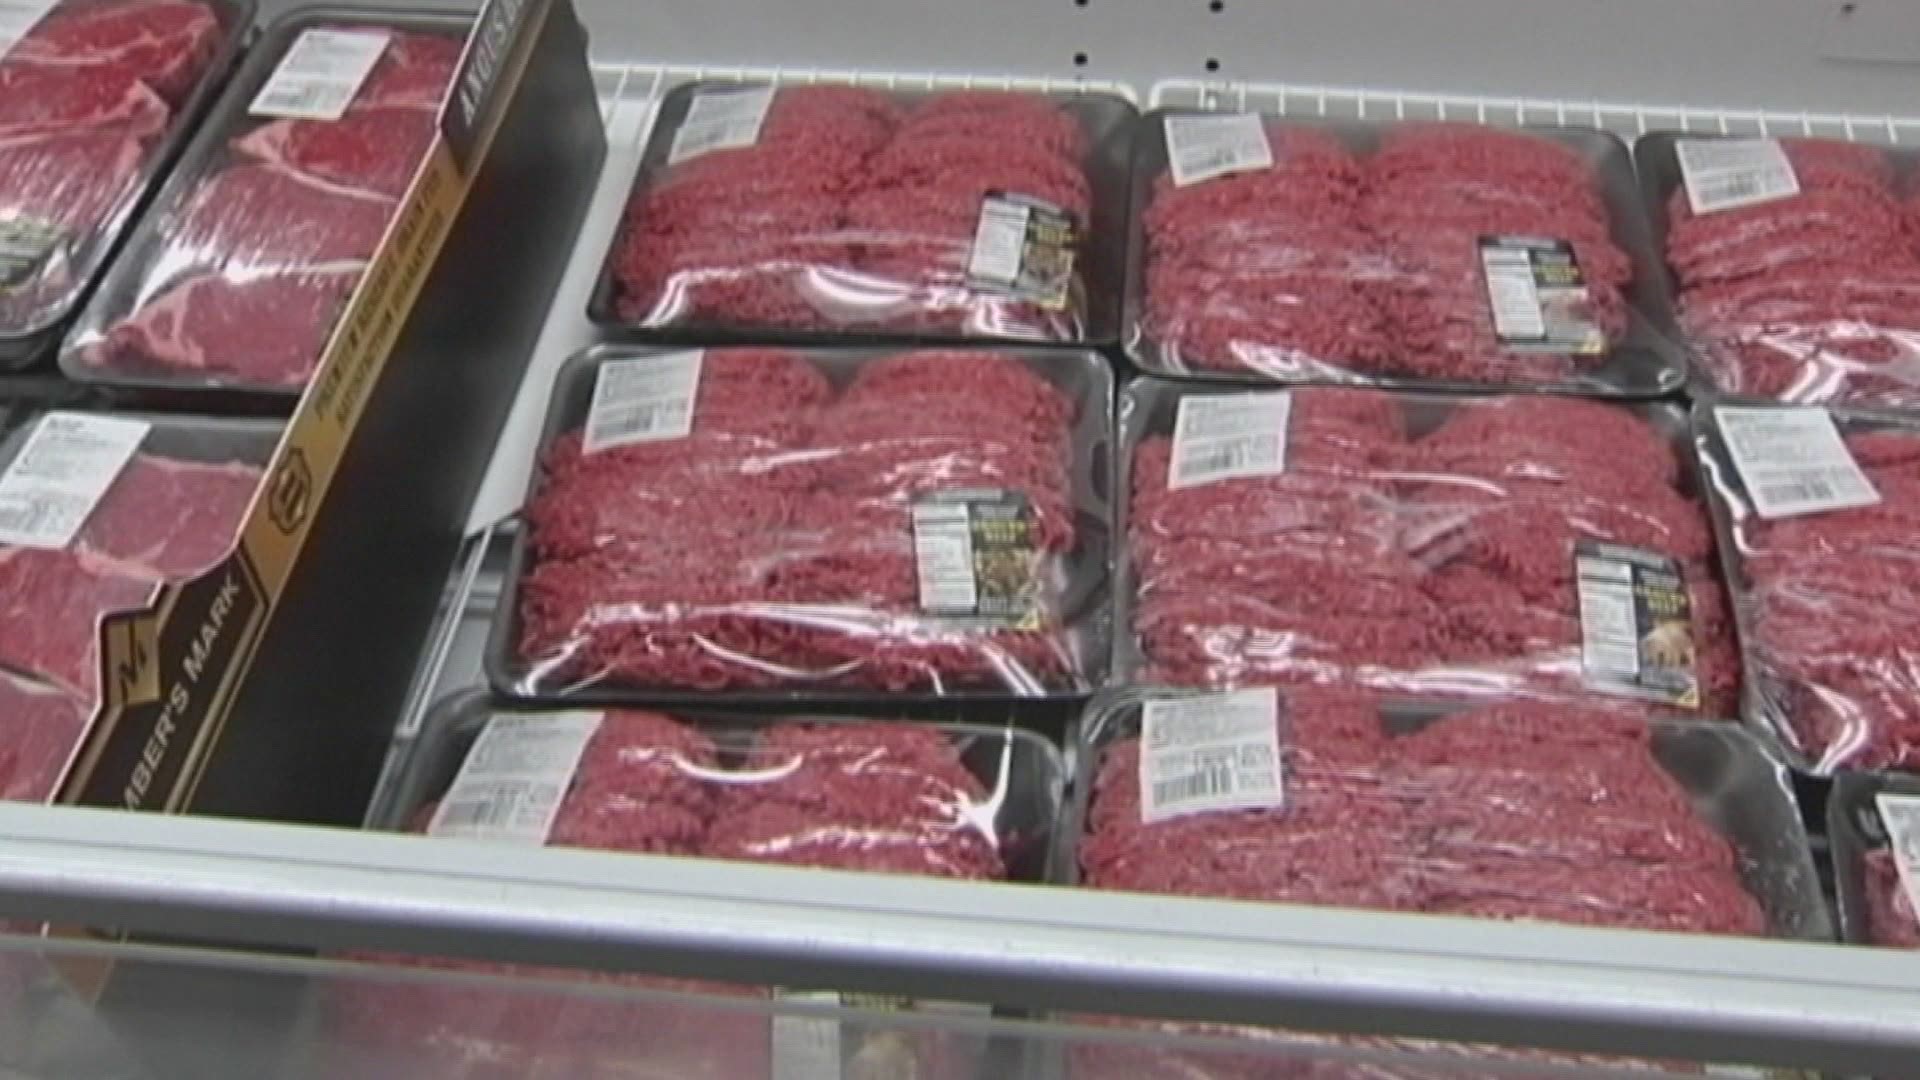 The proposal aims to provide a way for smaller meat producers to expand into other markets, as long as their products pass state inspection program standards.